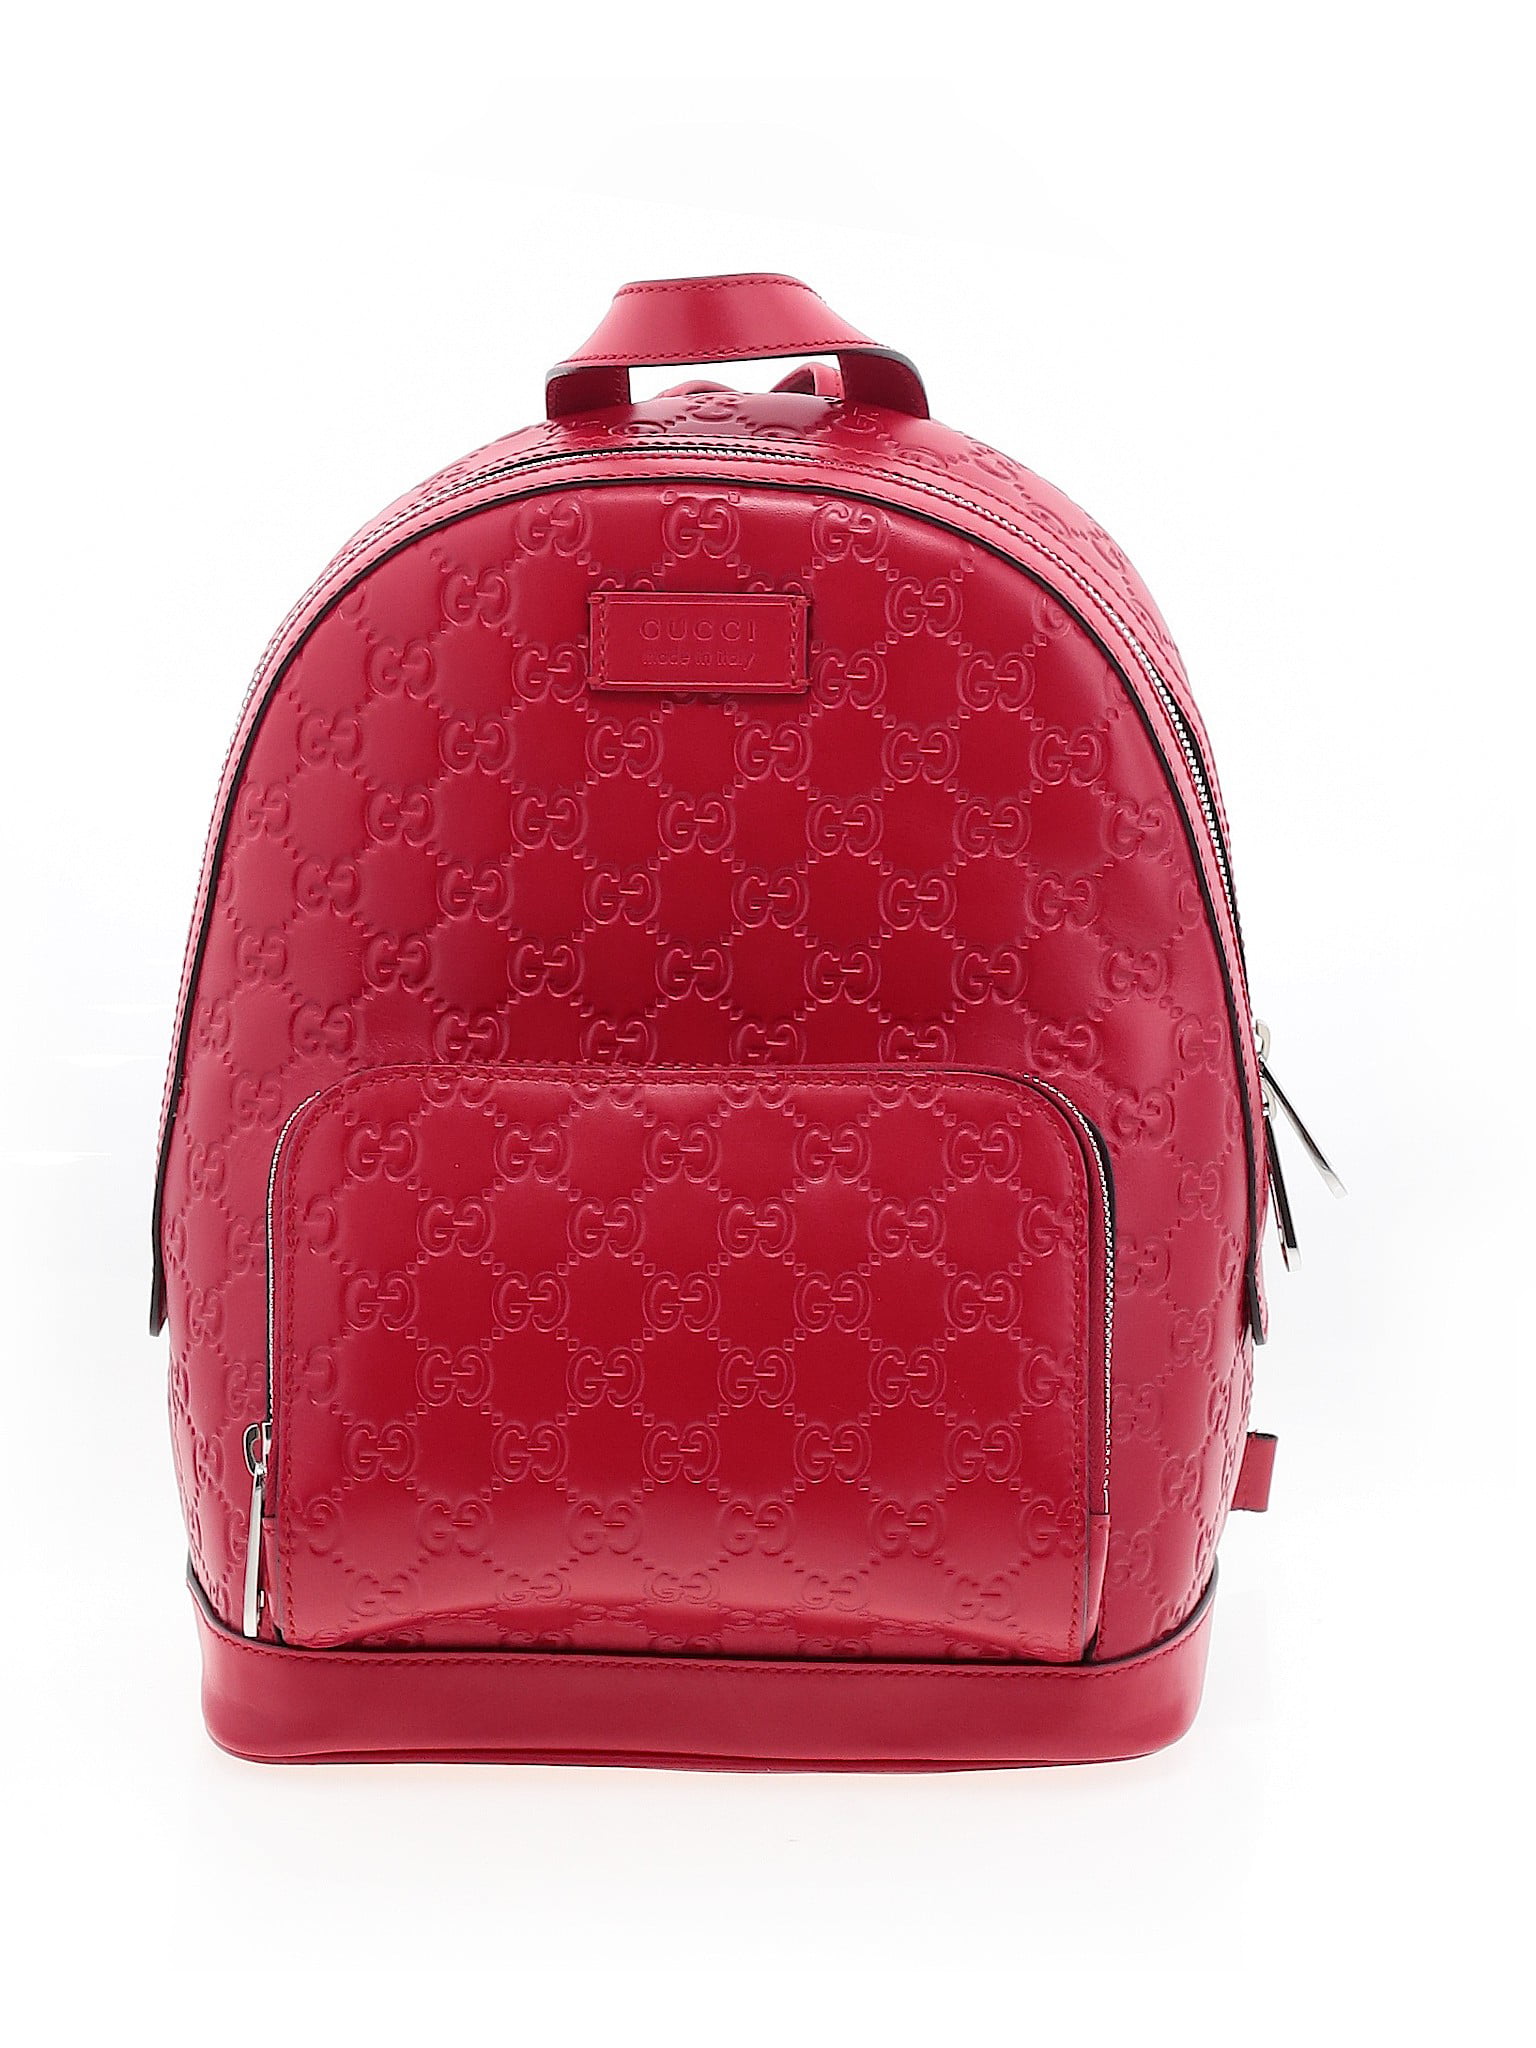 Gucci - Pre-Owned Gucci Women's One Size Fits All Leather Backpack ...